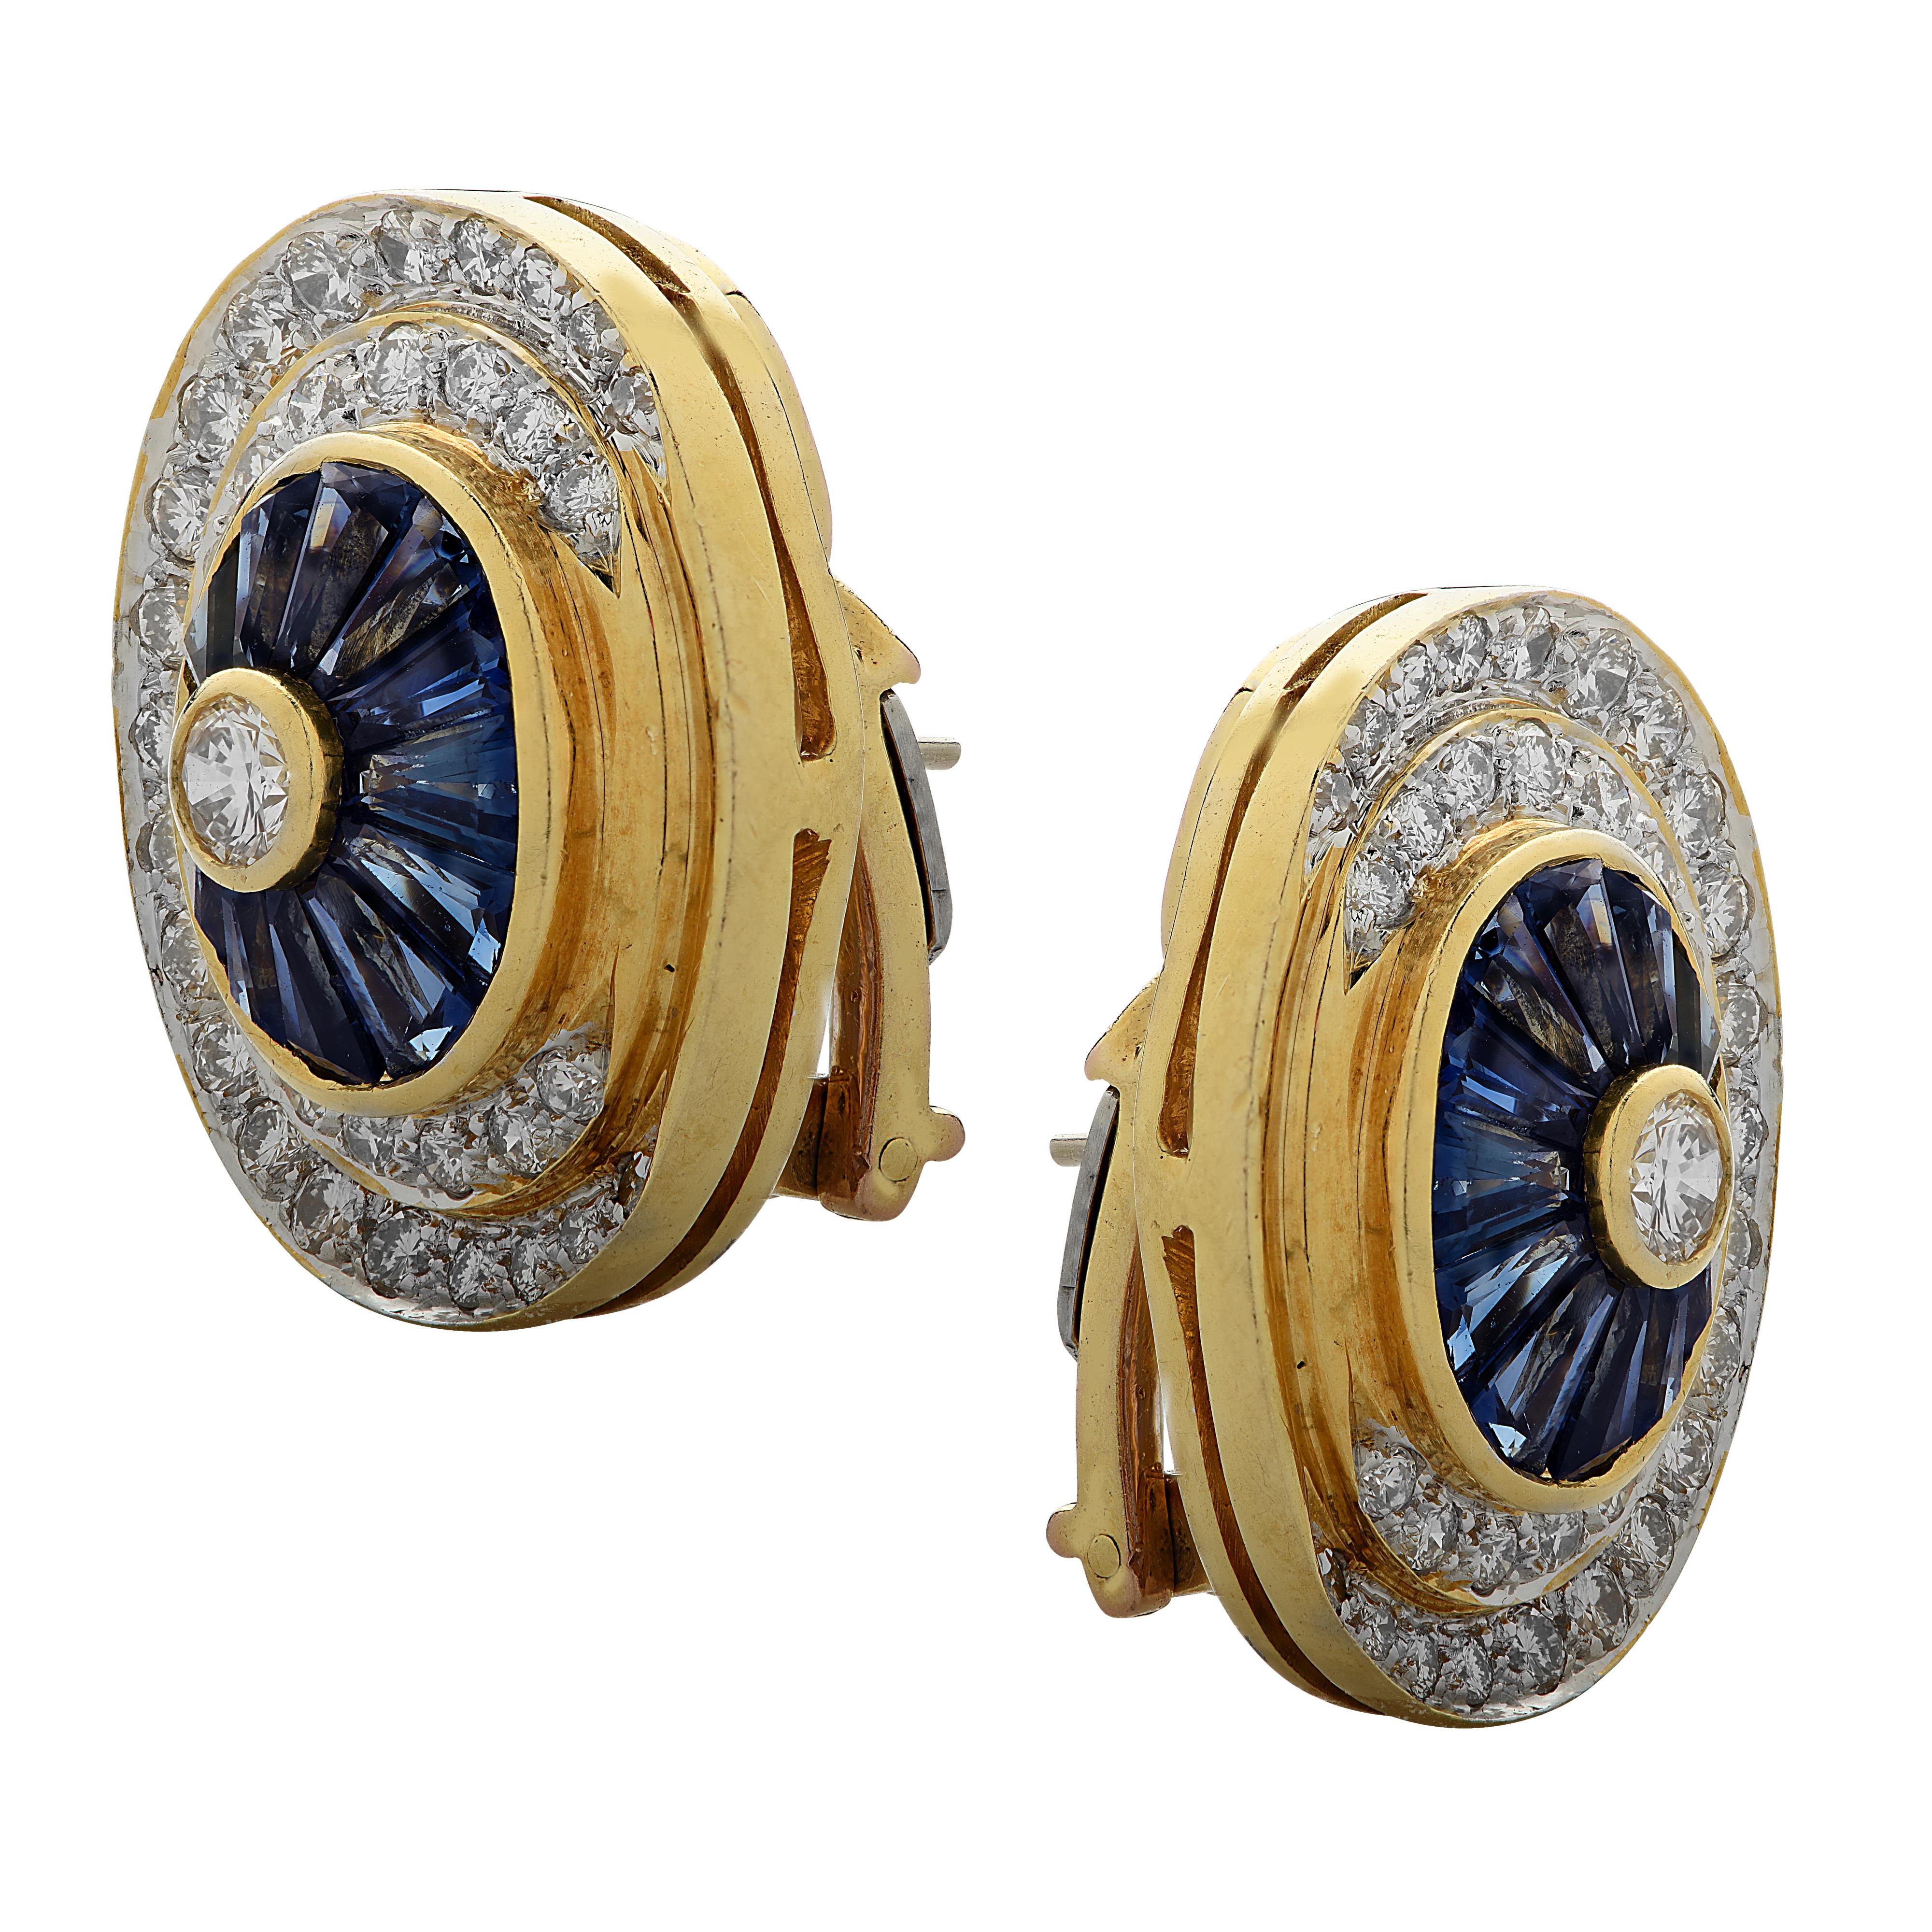 Stunning stud earrings crafted in yellow and white gold, featuring 76 round brilliant cut diamonds weighing approximately 2 carats total, G color, VS-SI clarity and 24 baguette cut sapphires weighing approximately 1.25 carats total. The center